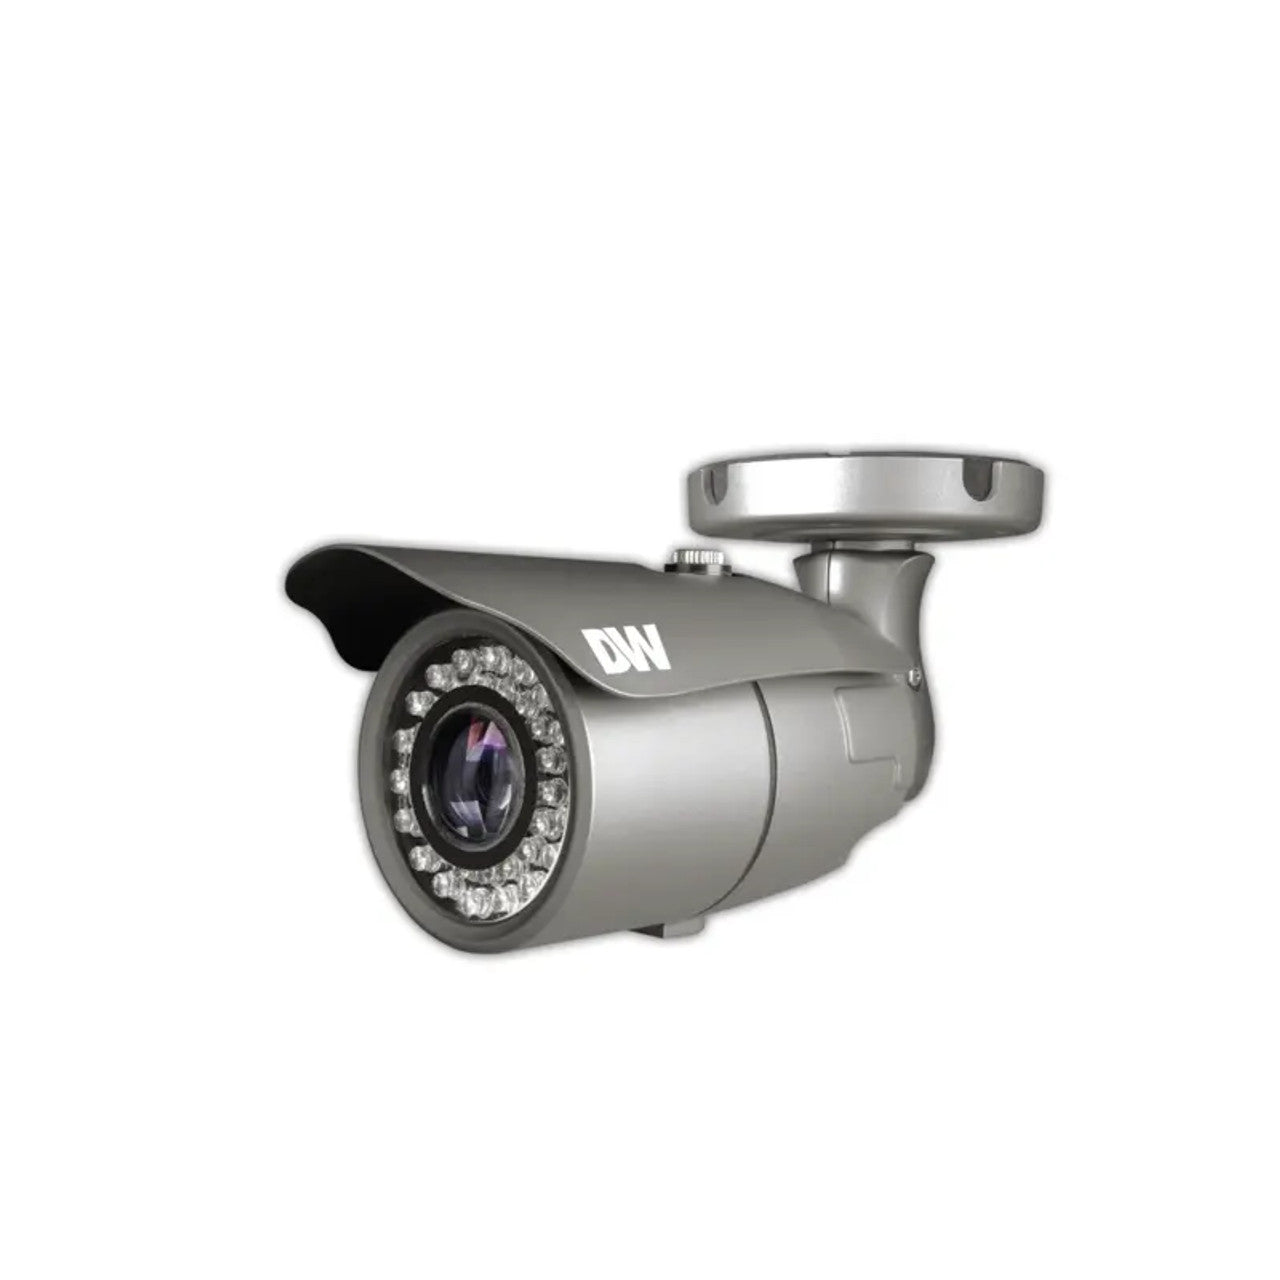 Digital Watchdog DWC-B6883WTIR 4K bullet HD CCTV Security Camera with 3.6~10mm motorized zoom and color in near-total darkness and IR